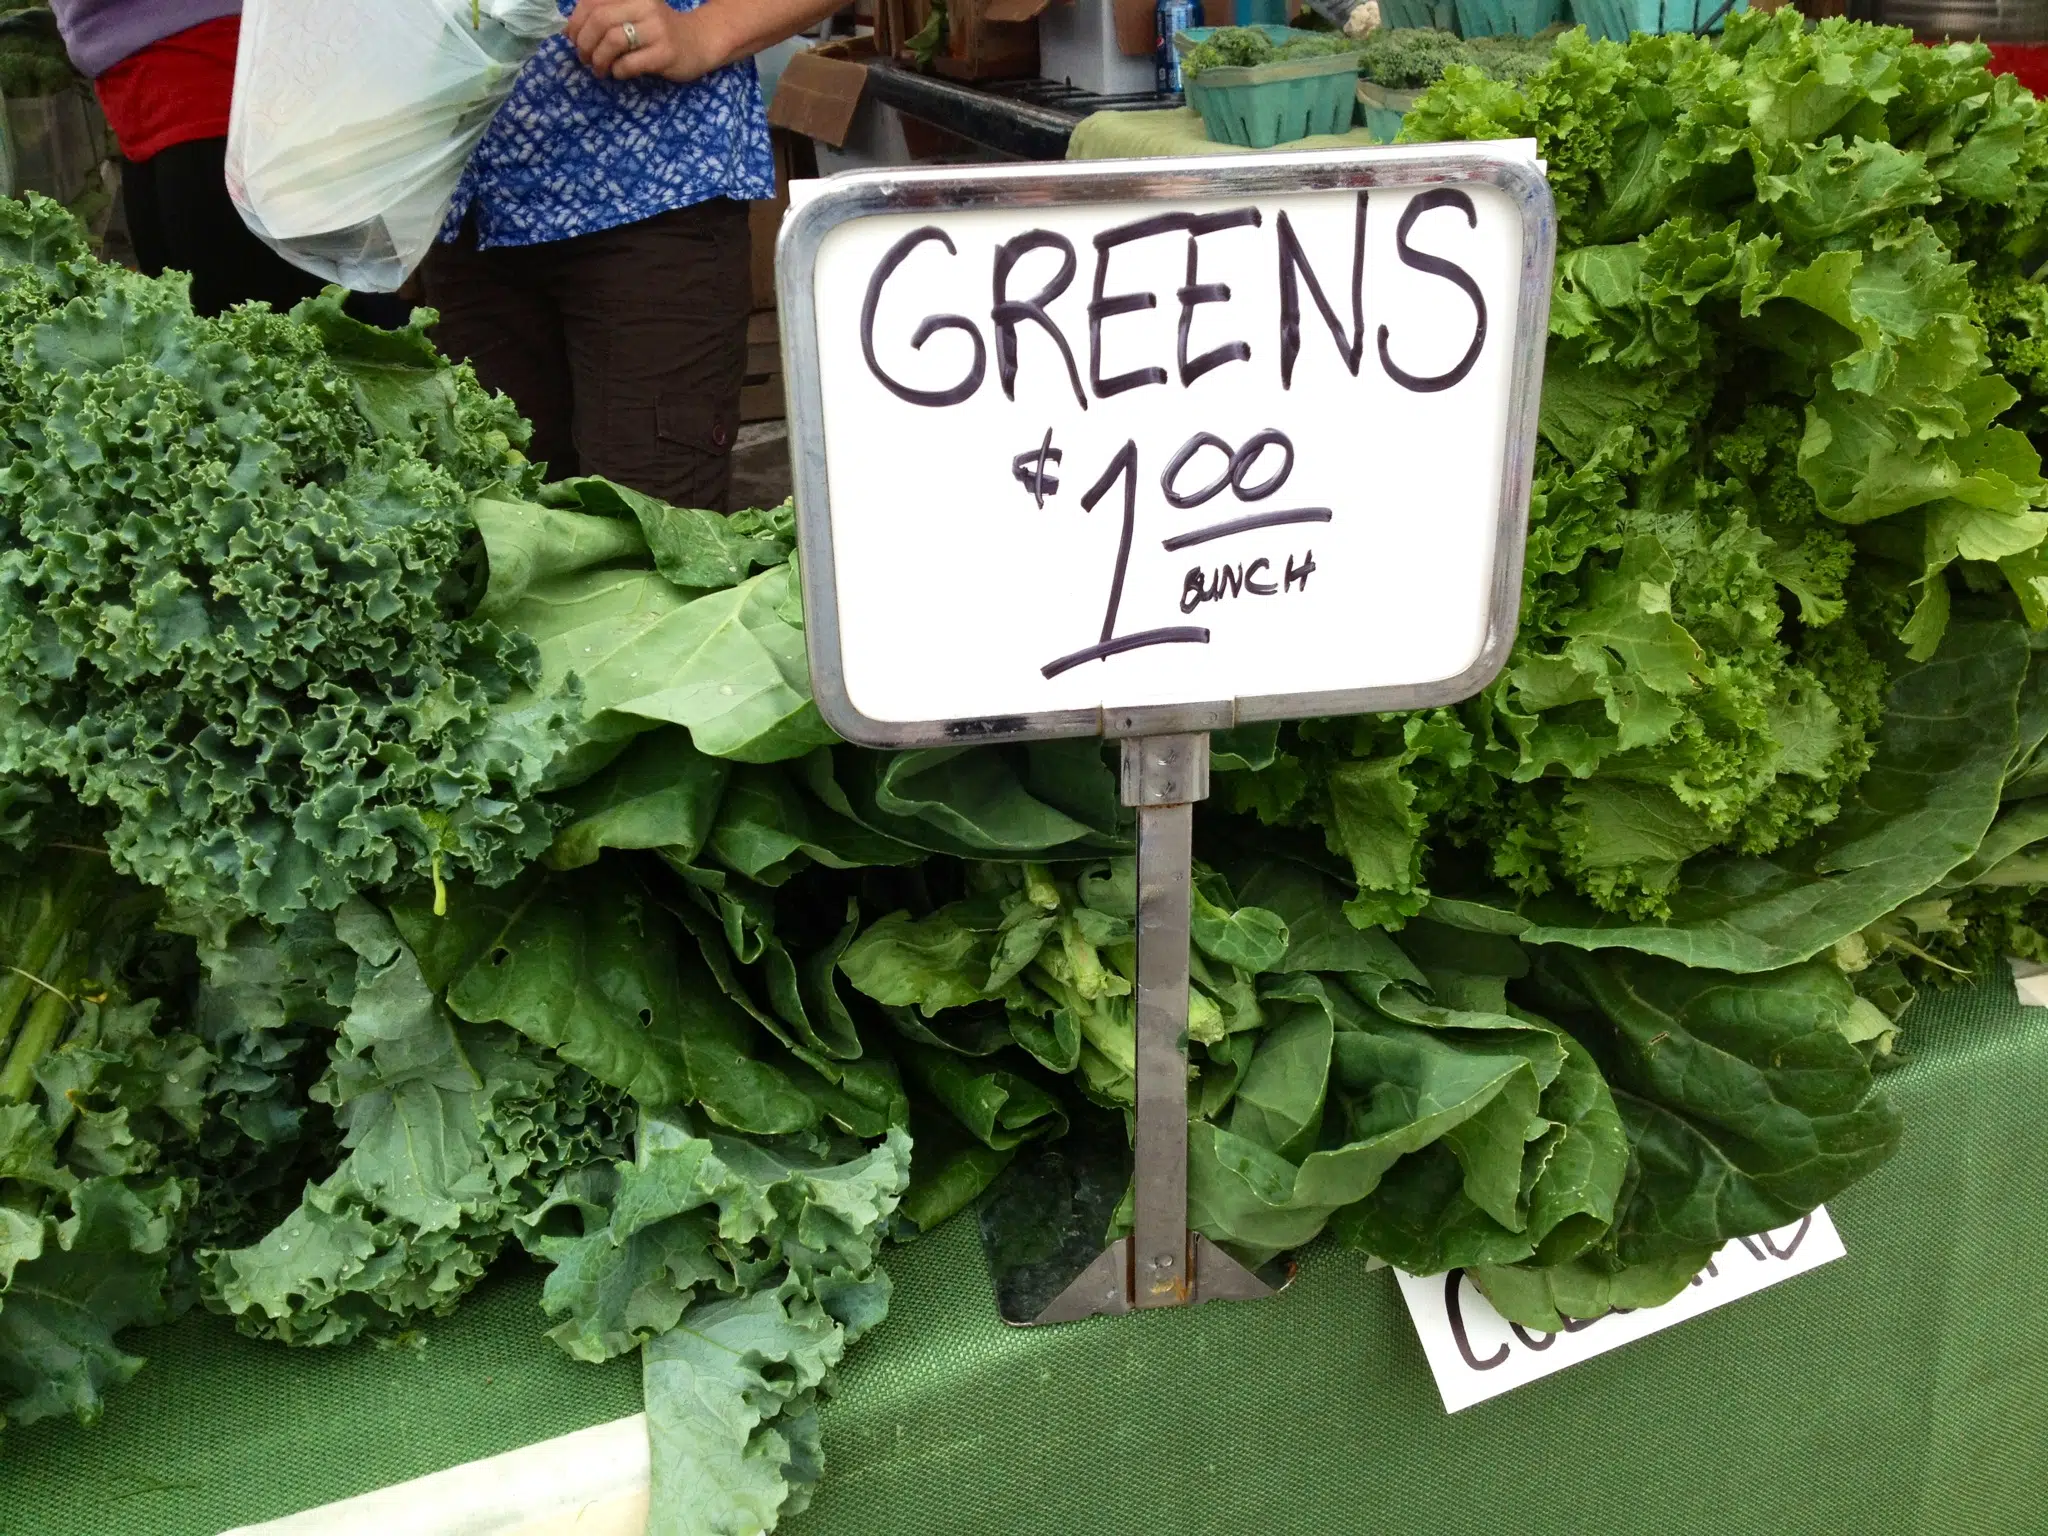 bunches of greens at farmers market